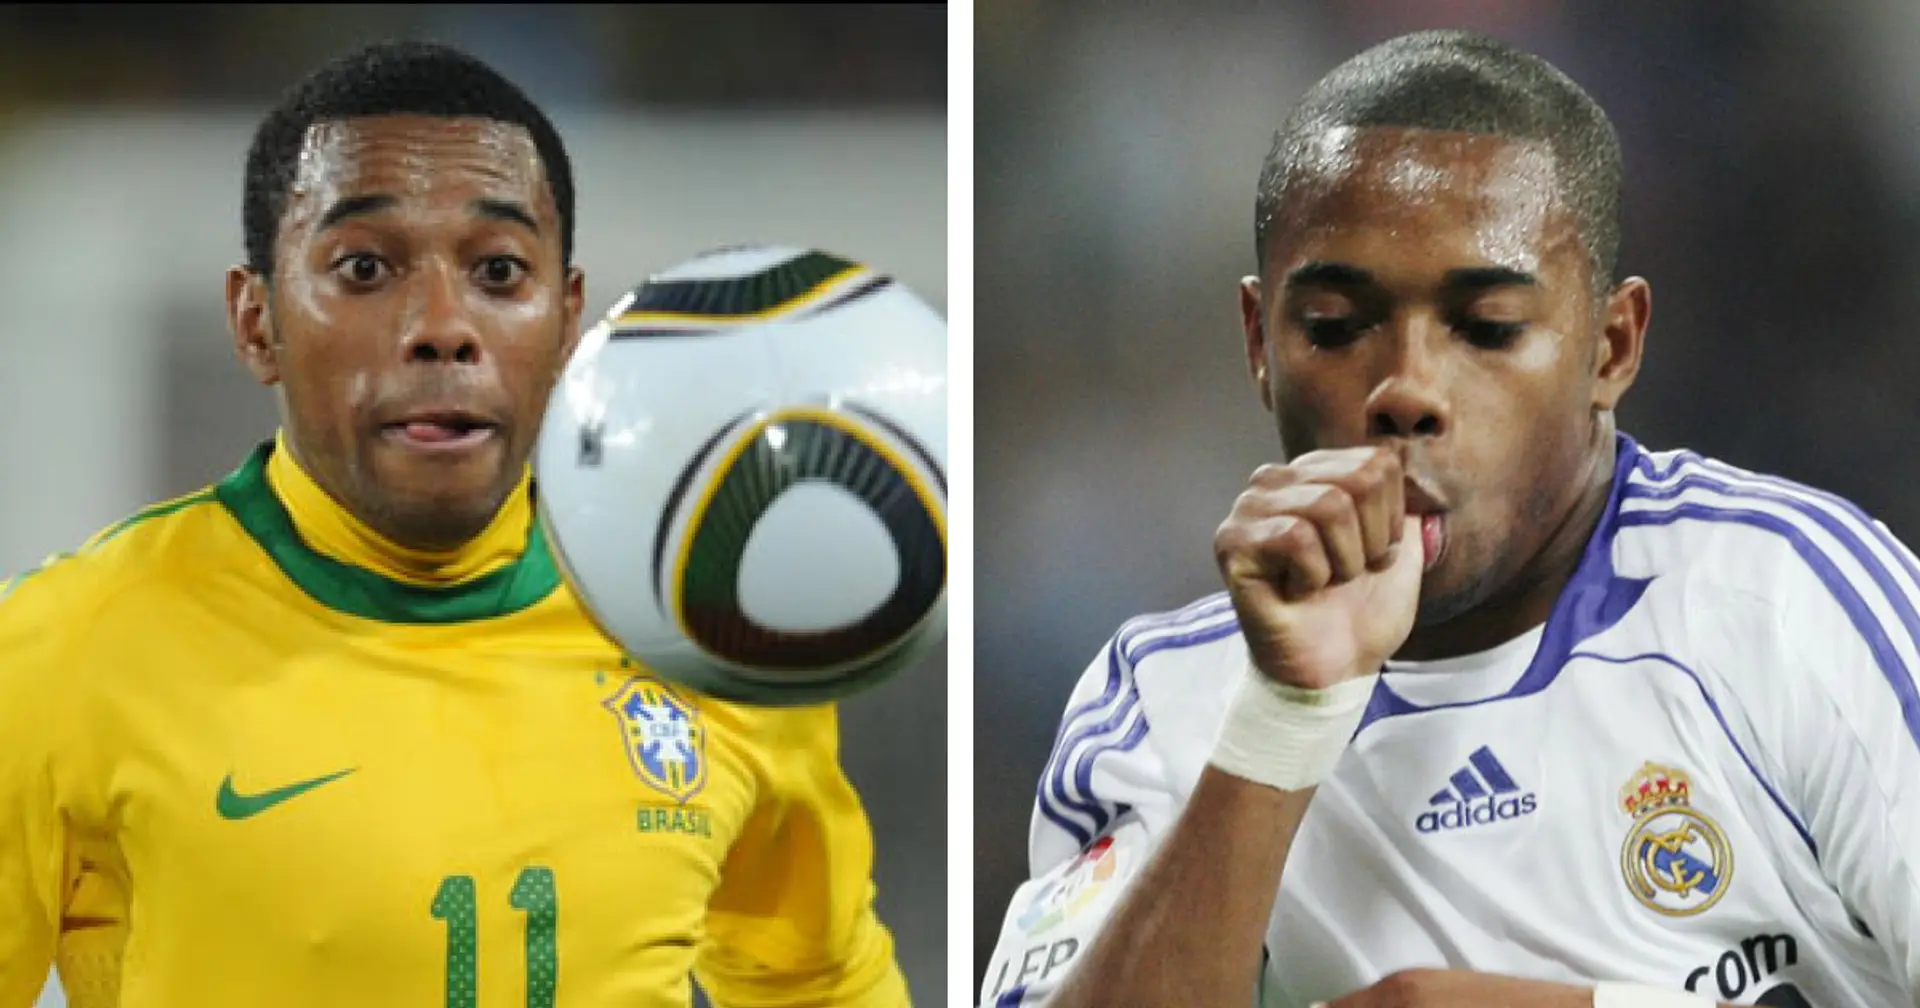 Robinho facing 9 years in prison after conviction upheld